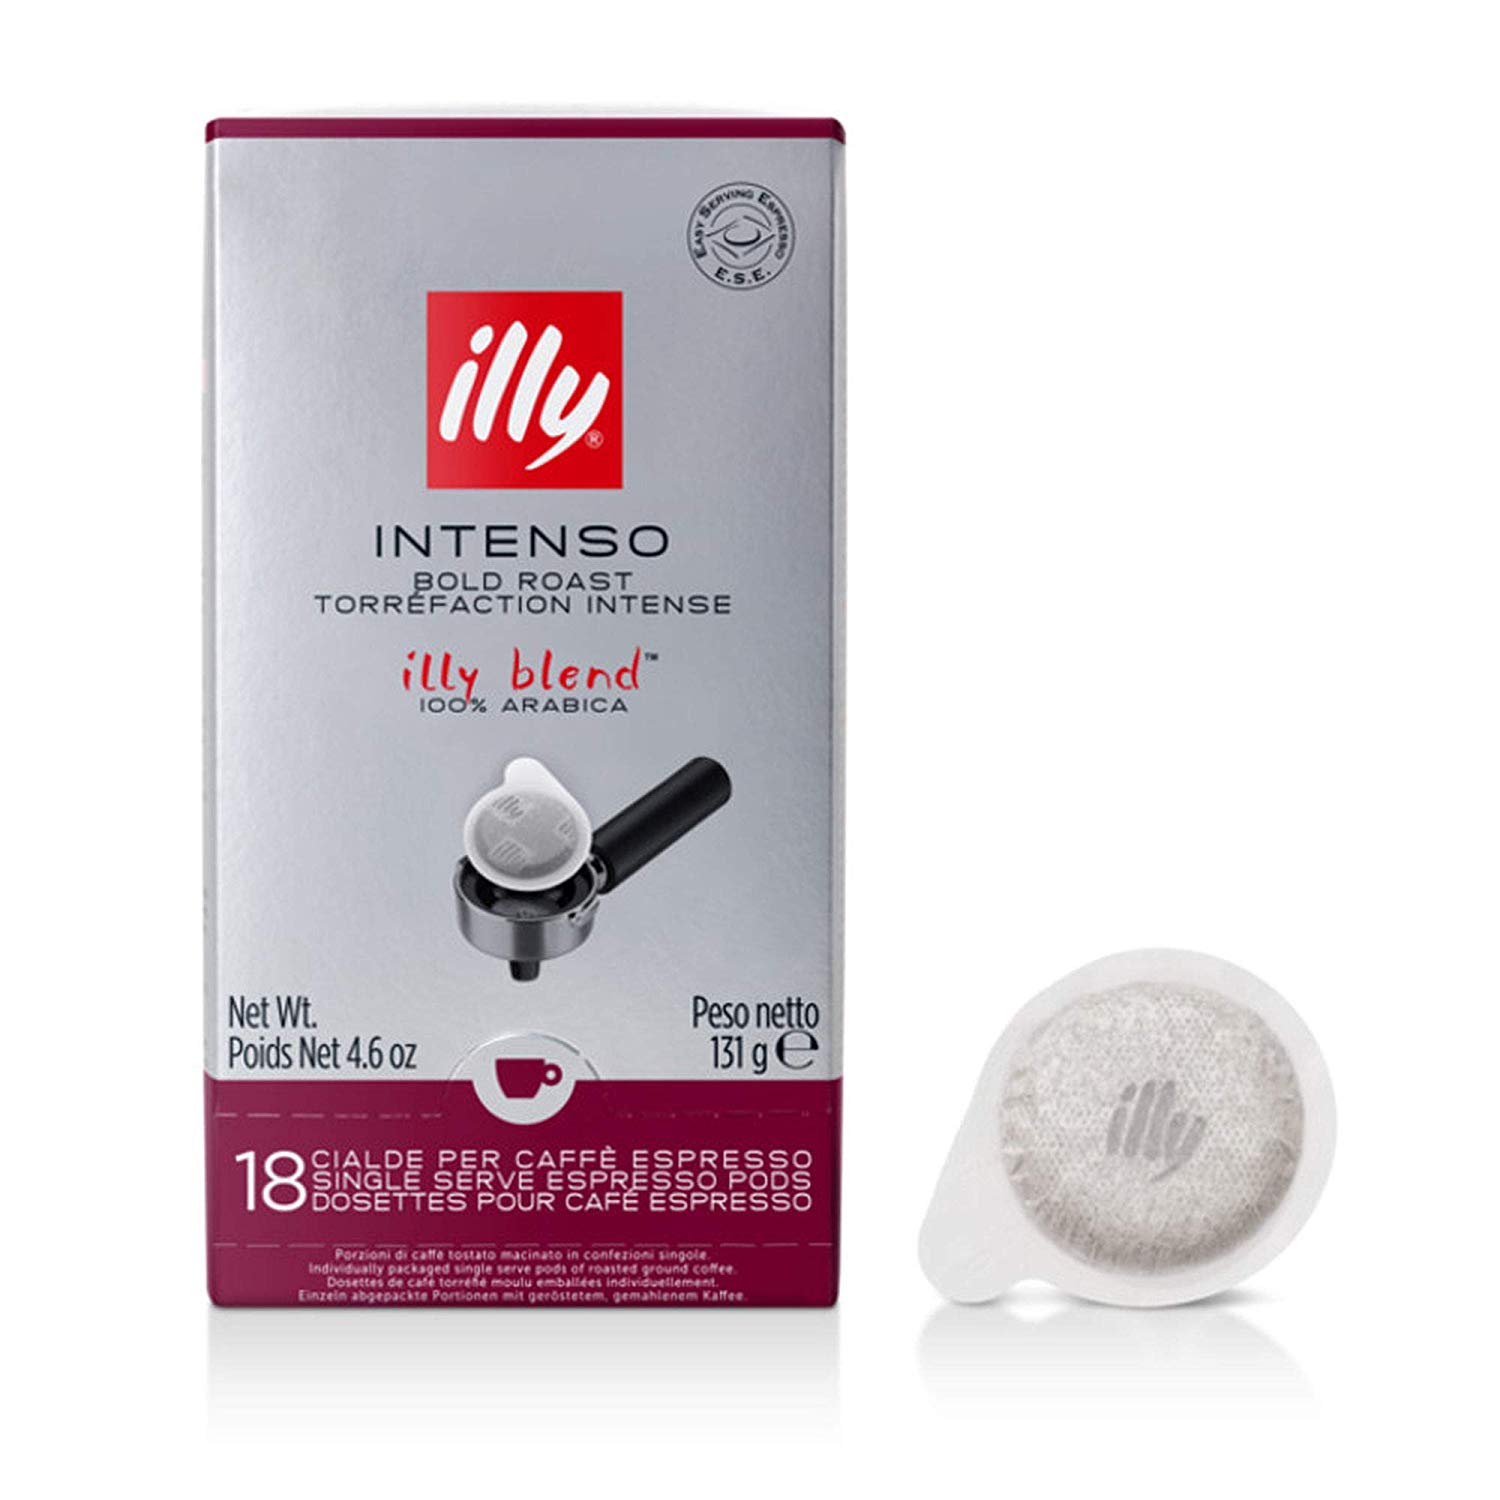 Illy ESE Espresso Pods Box of 18 - Intenso Bold Roast (Brown Label) #7999 - Case of 12